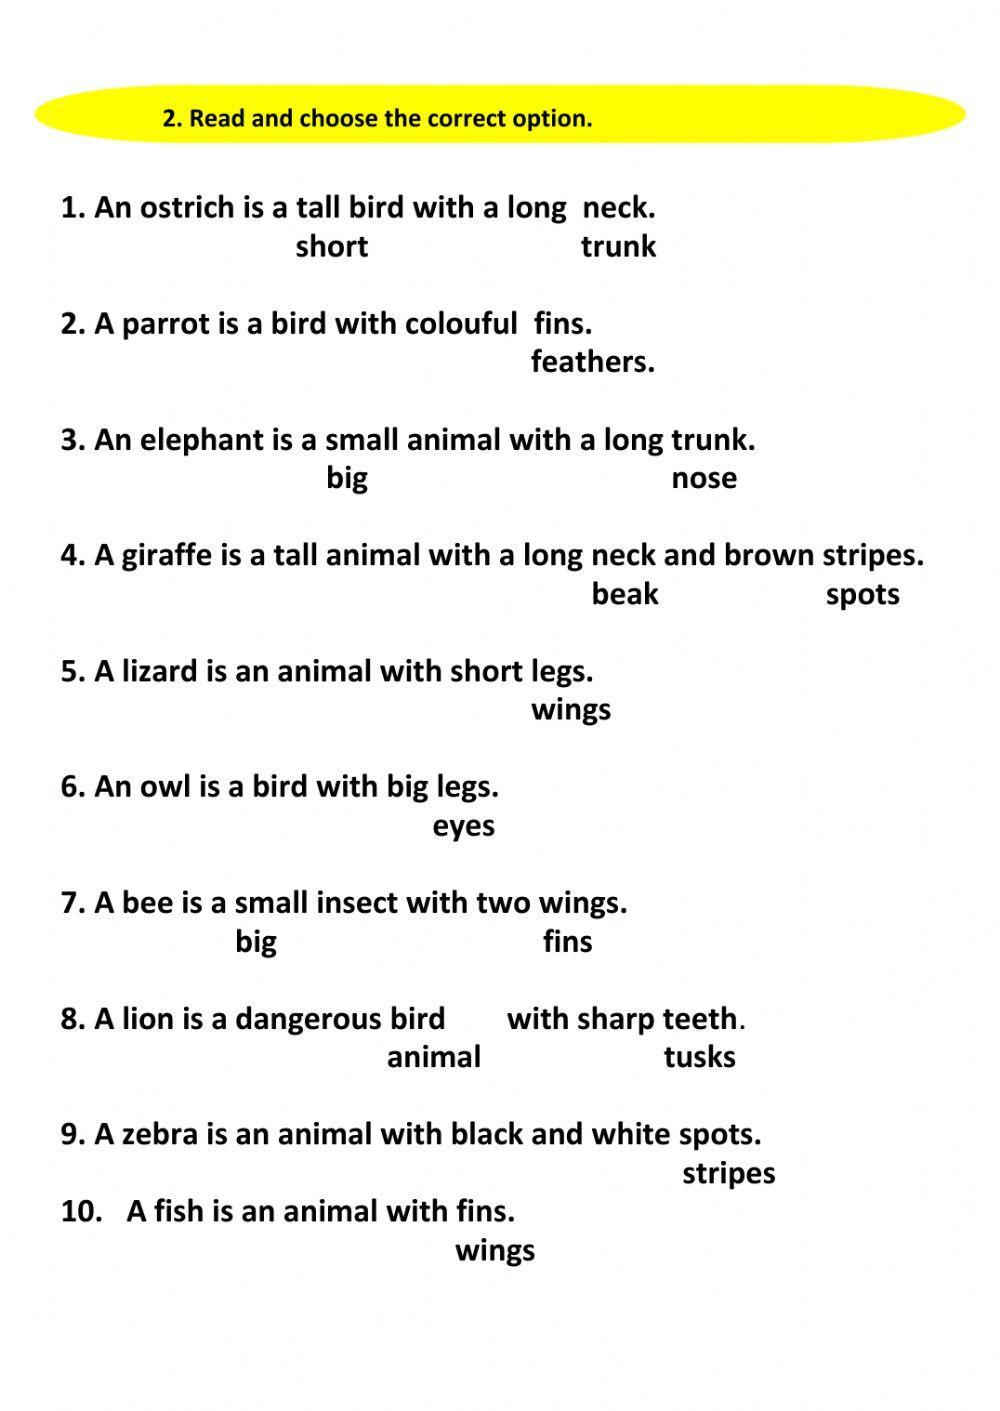 Animals and their body parts